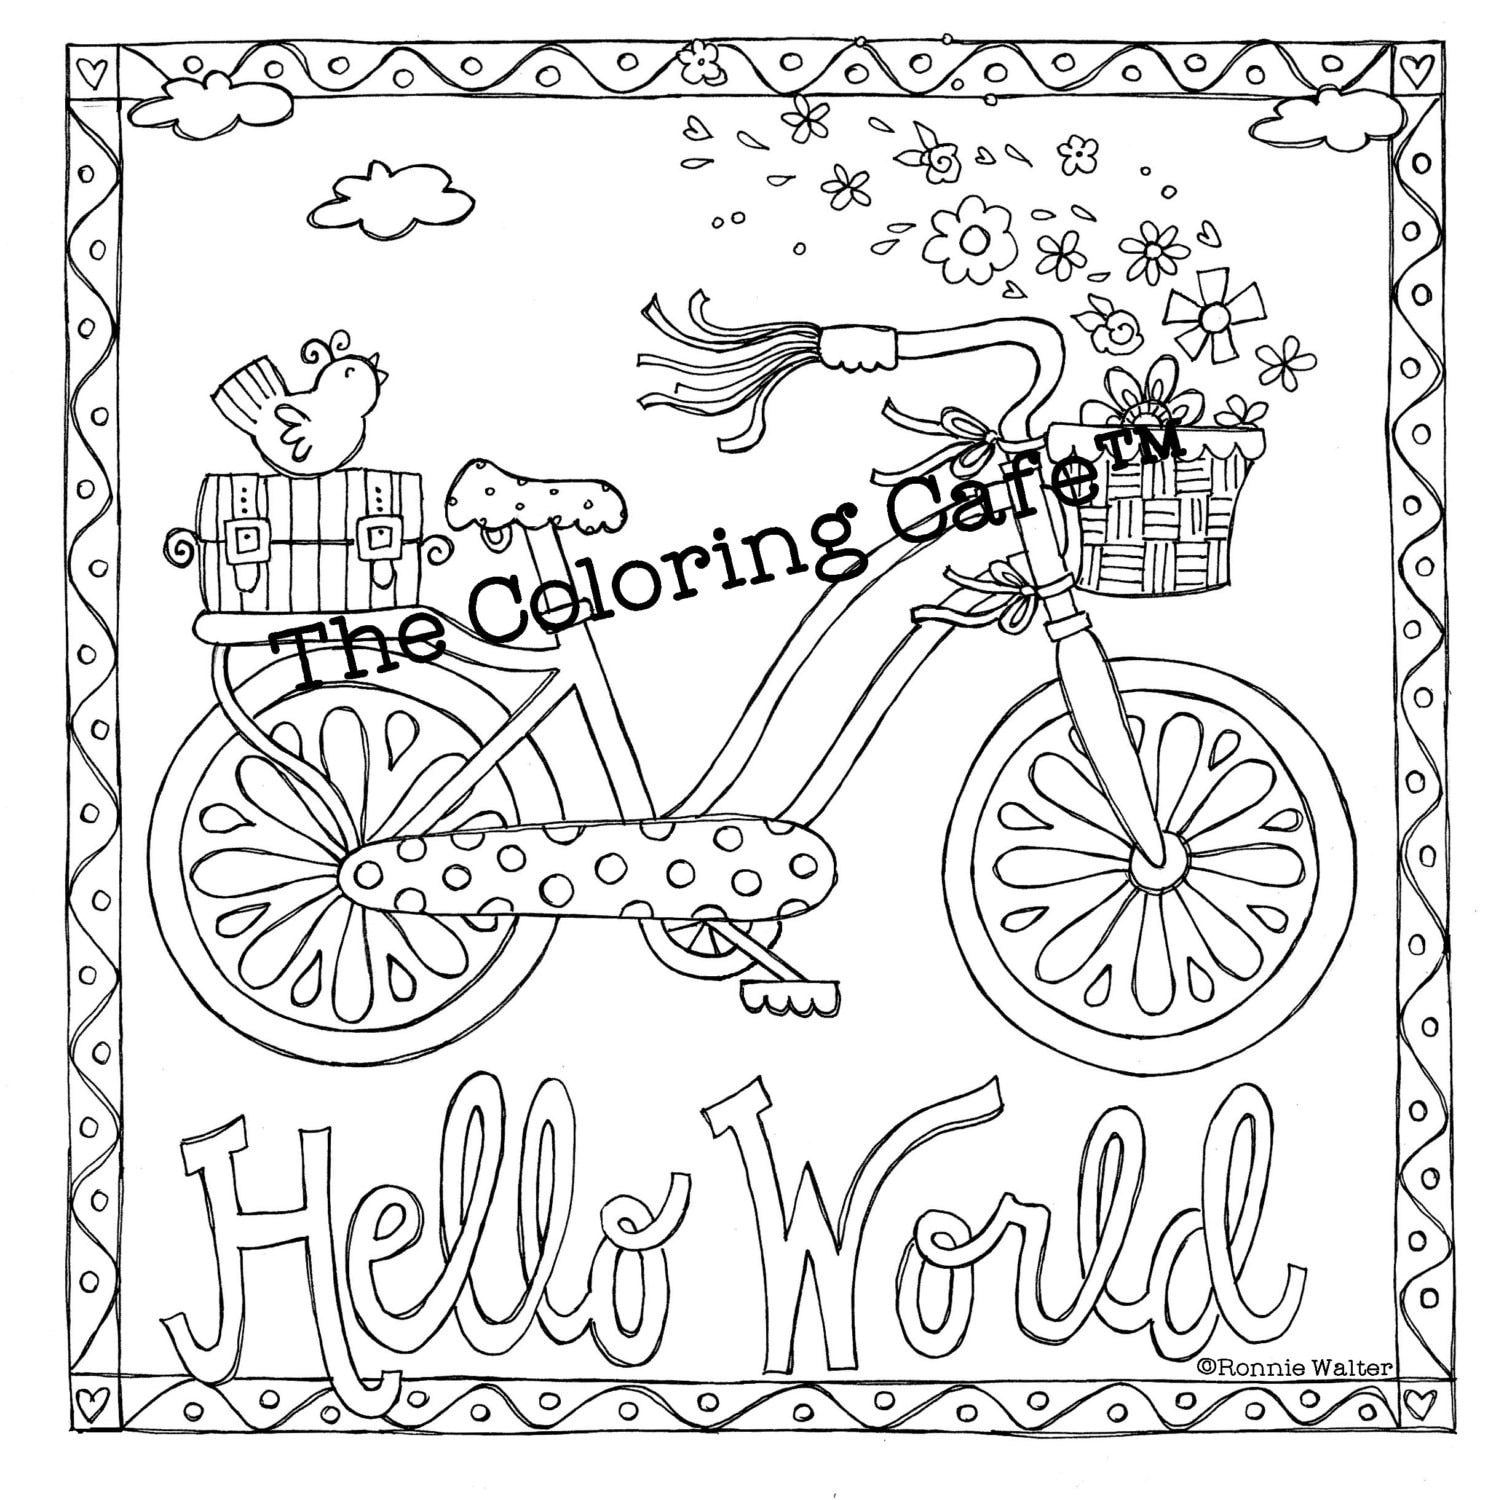 Coloring Cafe Coloring Book for GrownUp Girls by Ronnie